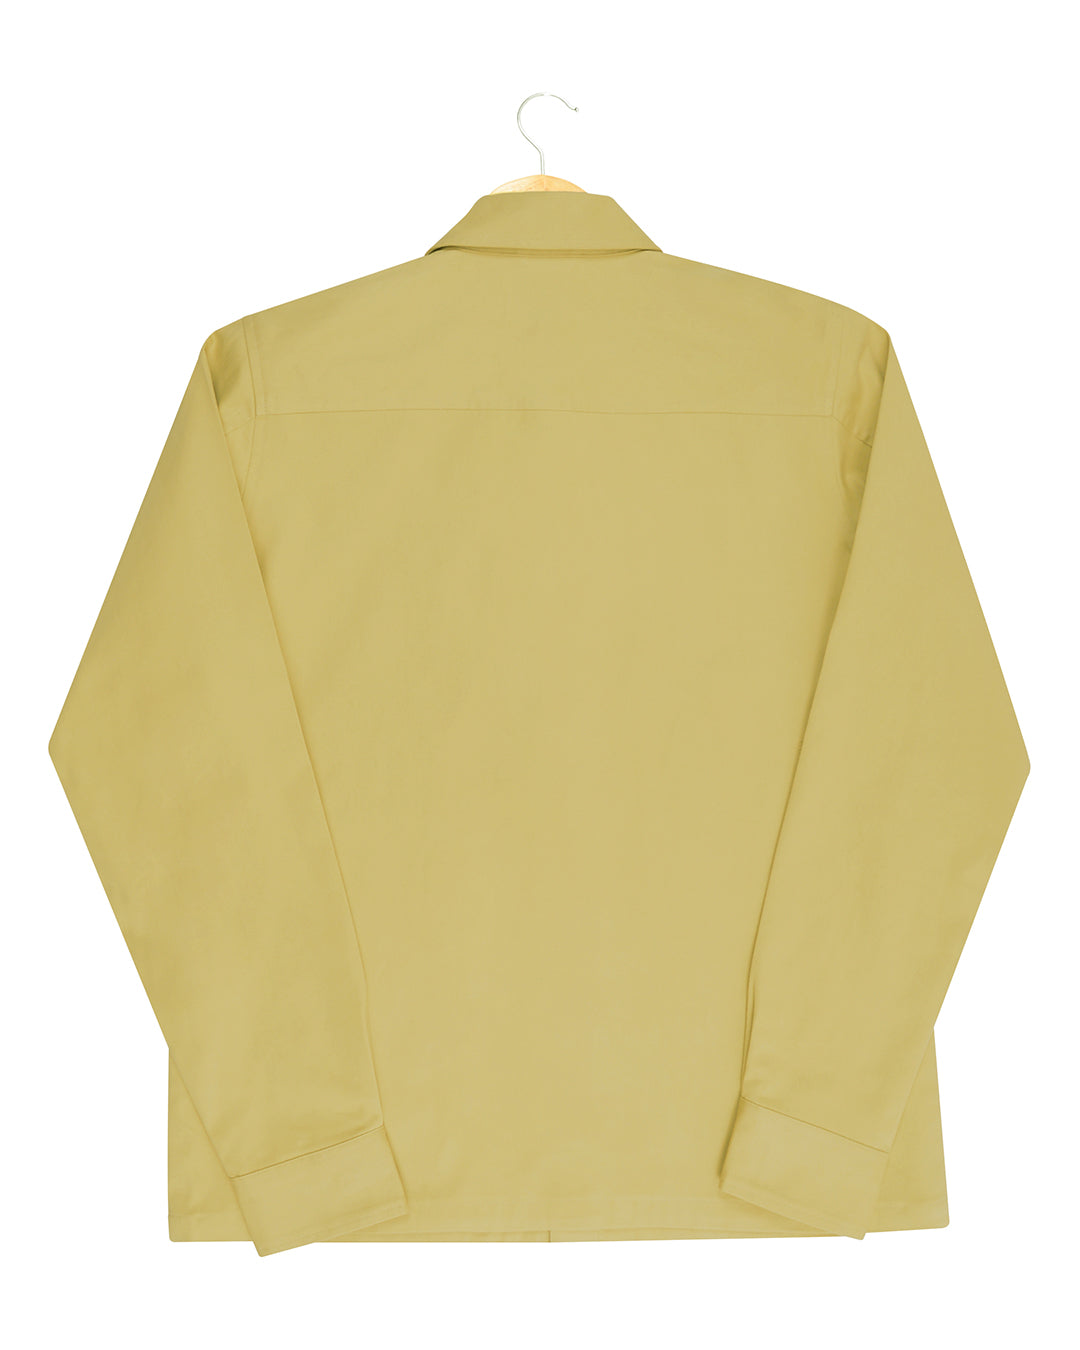 Back of the twill shirt jacket for men by Luxire in mellow mustard